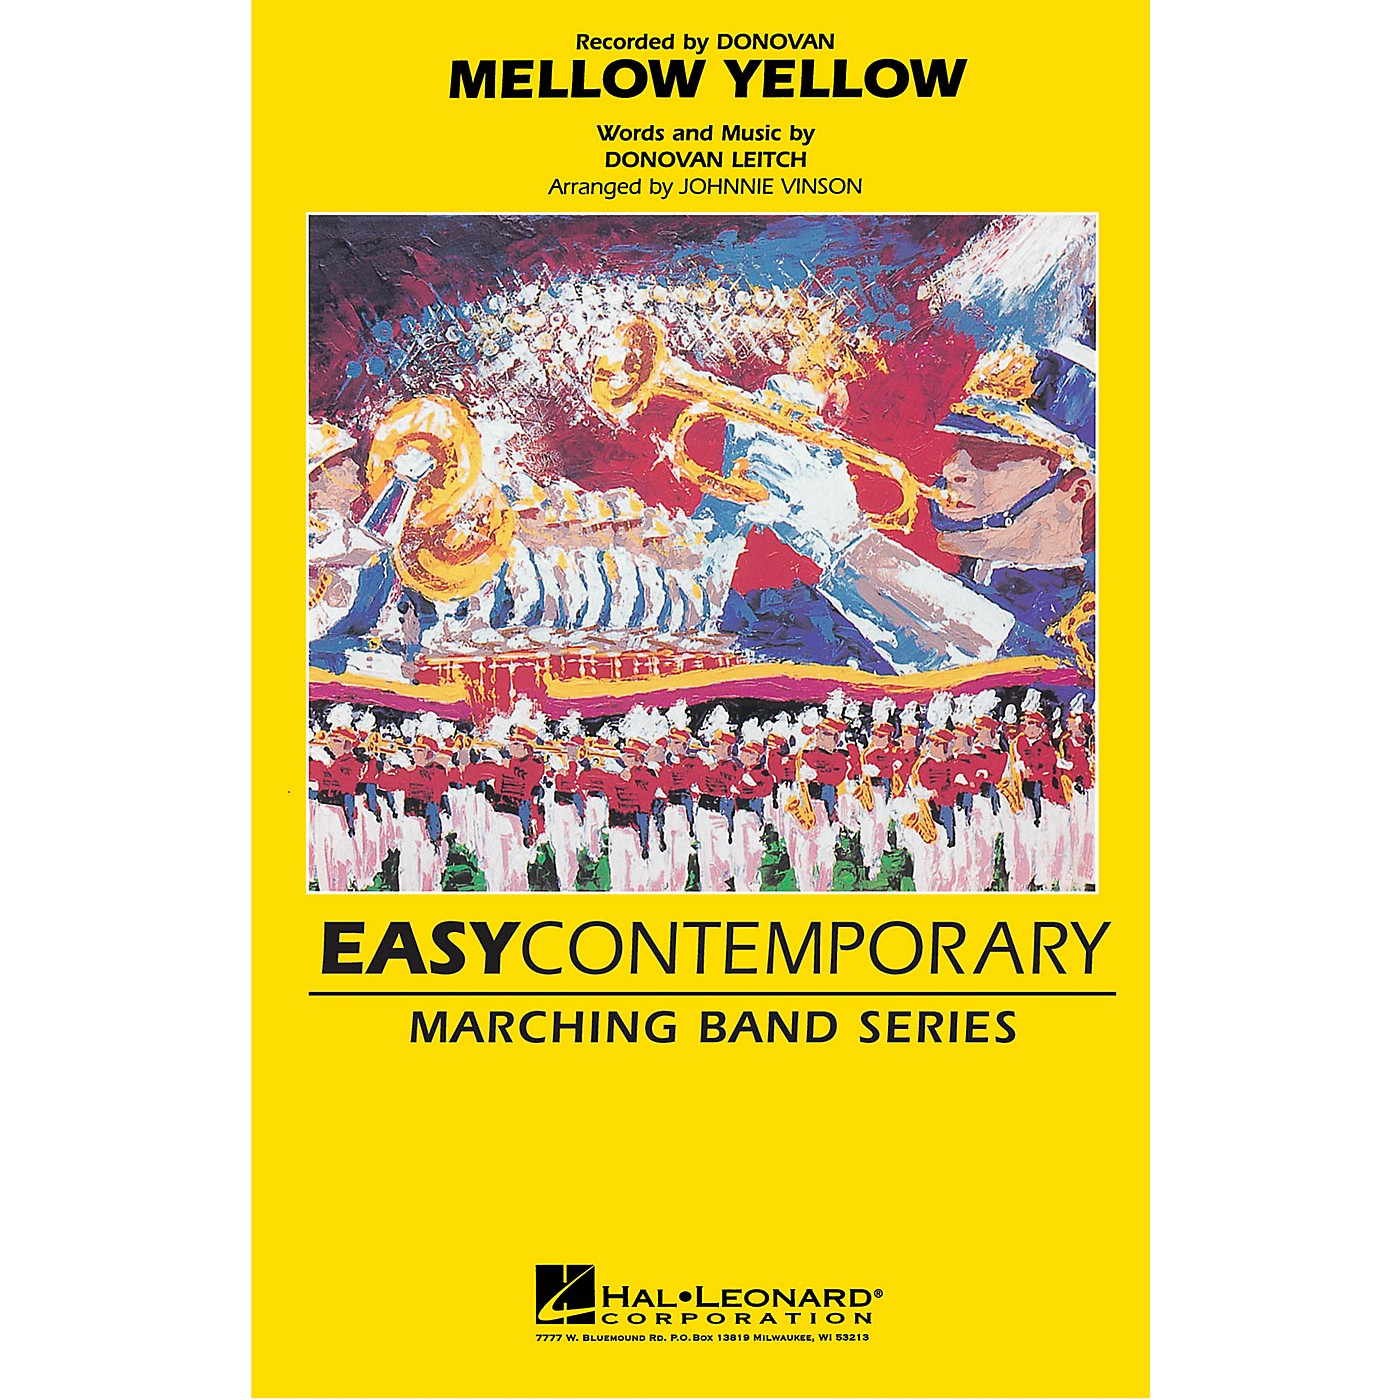 Hal Leonard Mellow Yellow Marching Band Level 2-3 Arranged by Johnnie Vinson thumbnail